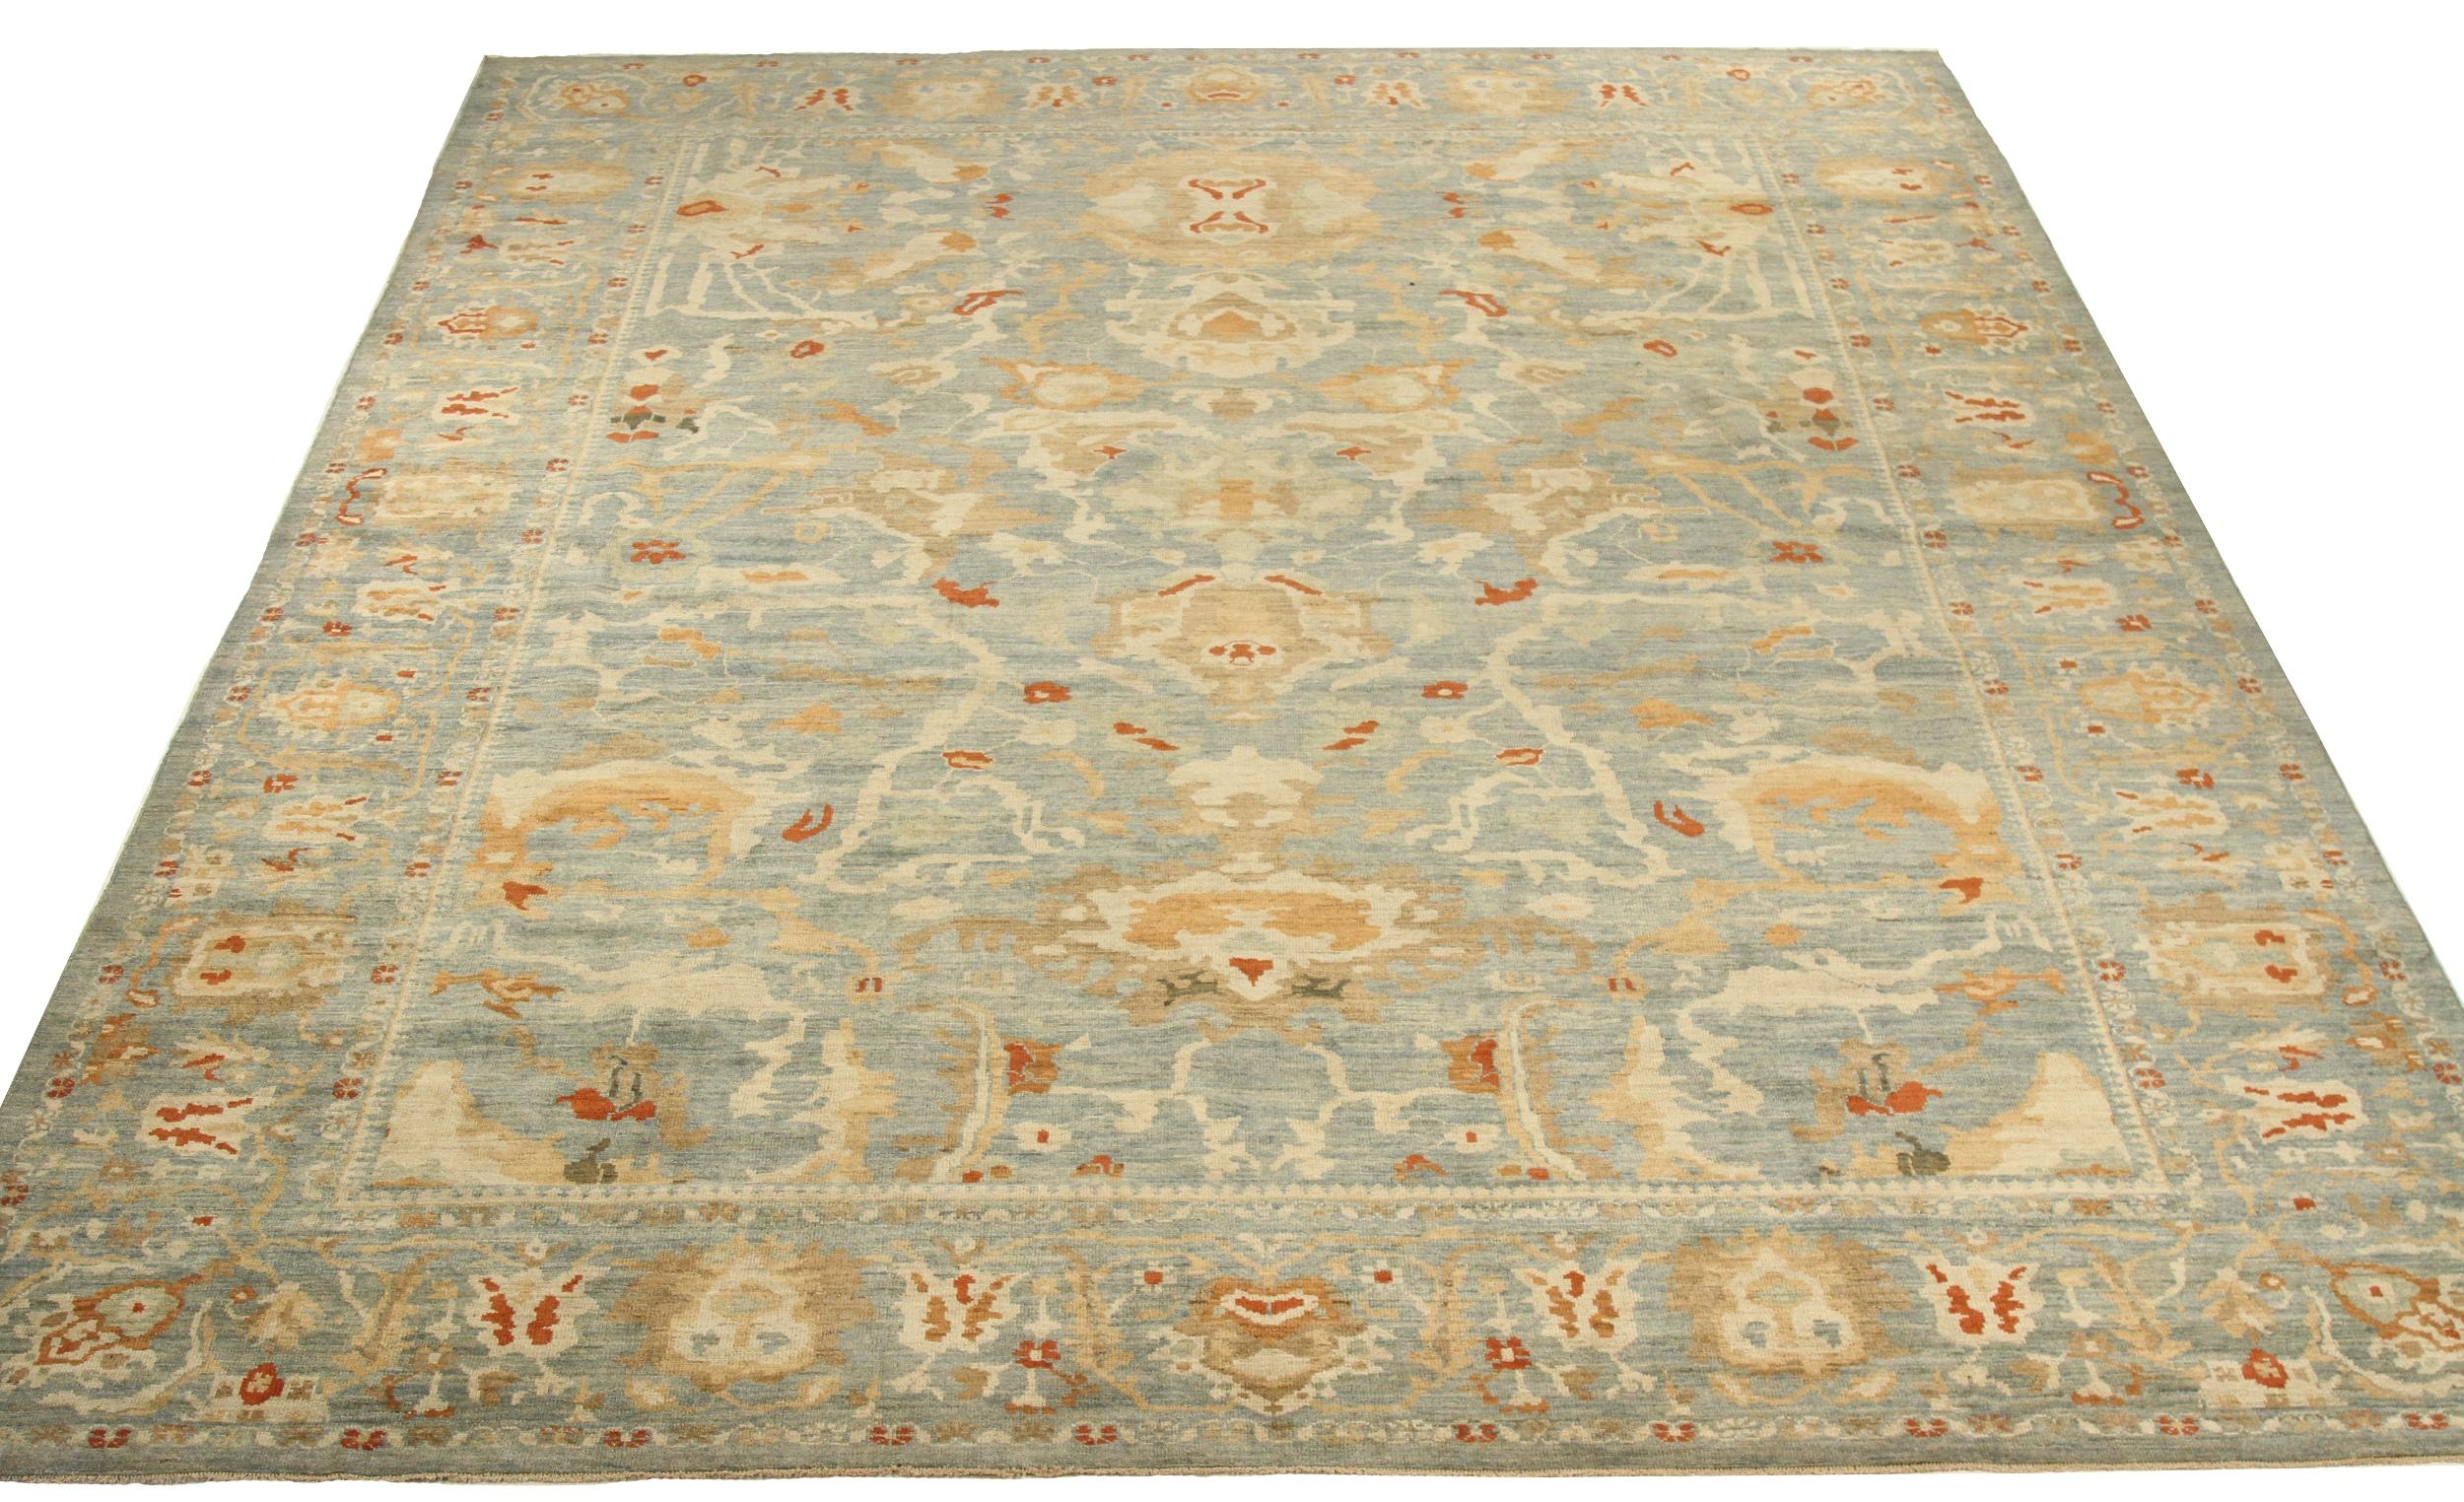 Modern hand-woven Persian area rug made from fine wool and all-natural vegetable dyes that are safe for people and pets. This beautiful piece features a rich field of floral details in various colors which is the traditional weaving design of